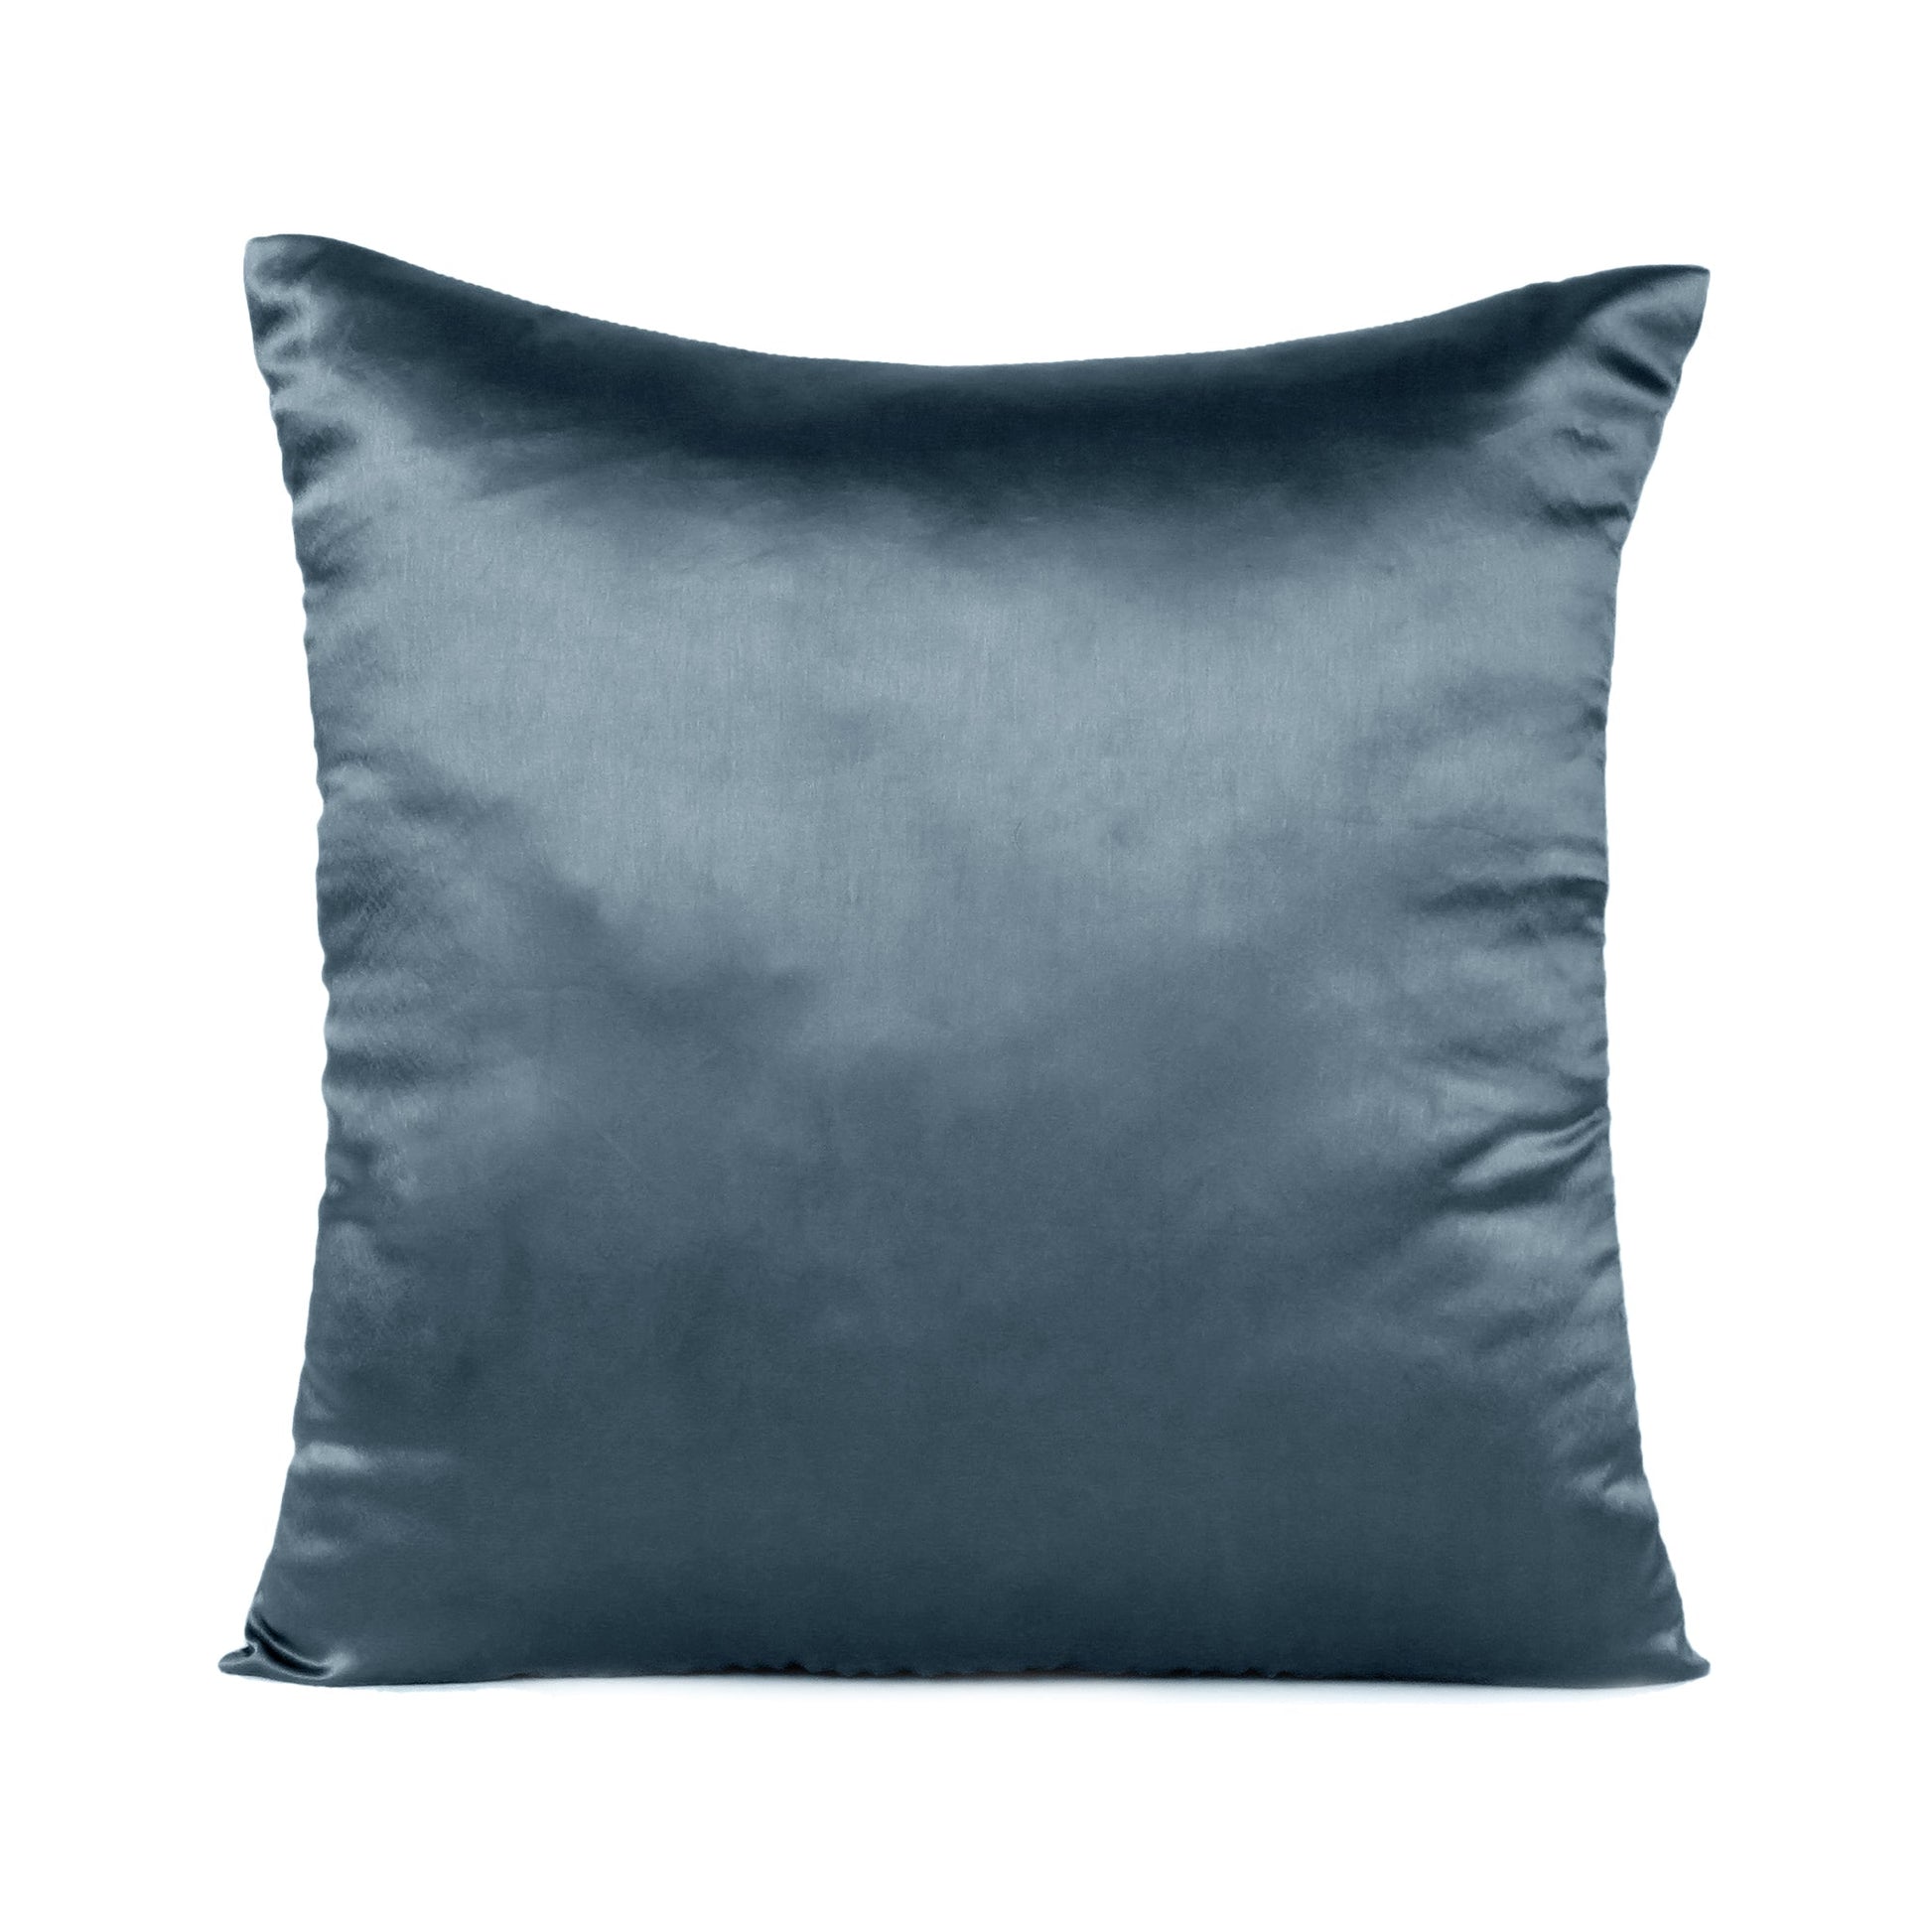 Castlerock gray Satin Silky Cushion Covers in Set of 2